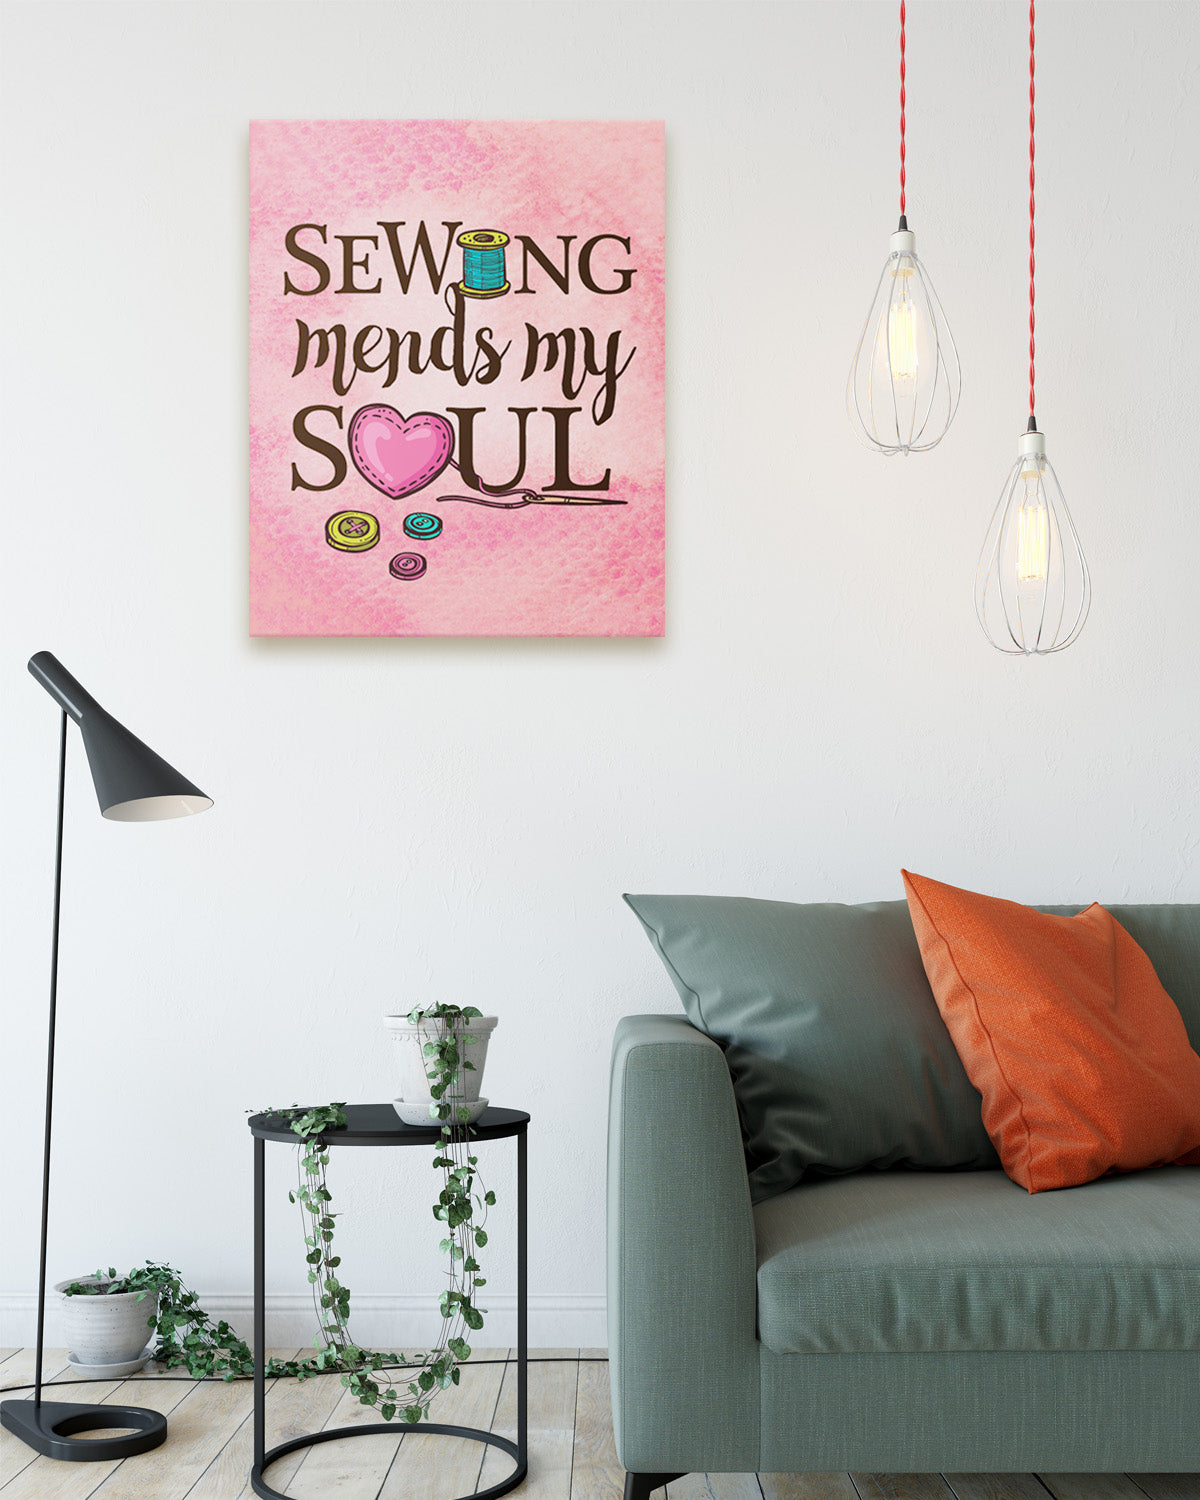 Sewing Mends My Soul - Sewing Wall Art Decor Print with a pink background - Poster & Canvas Sizes